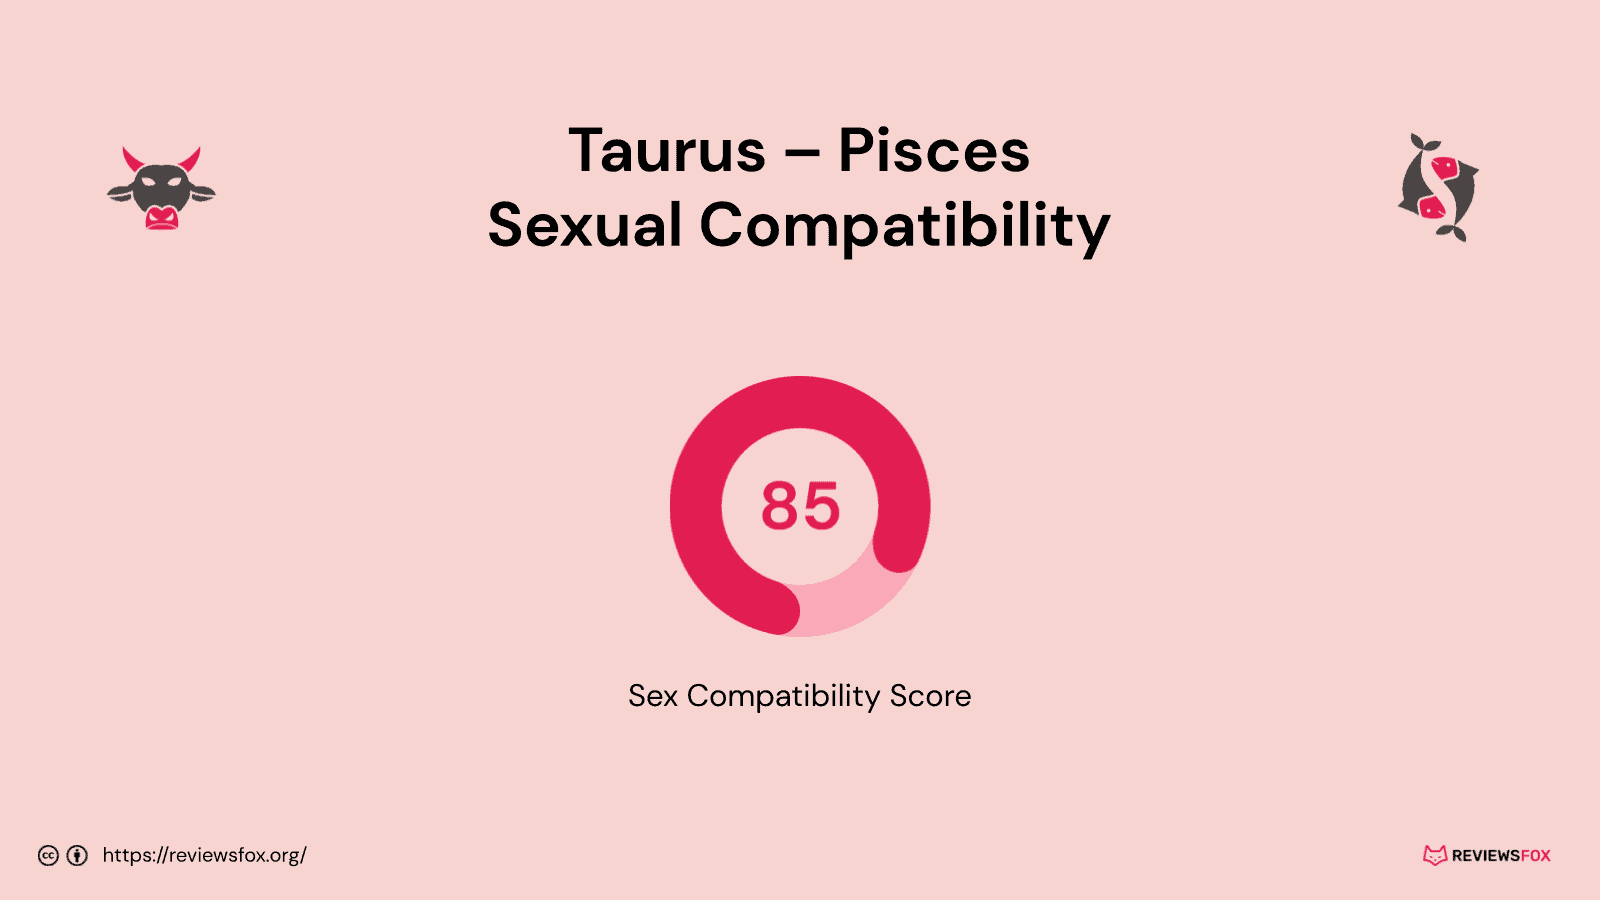 Taurus and Pisces sexual compatibility